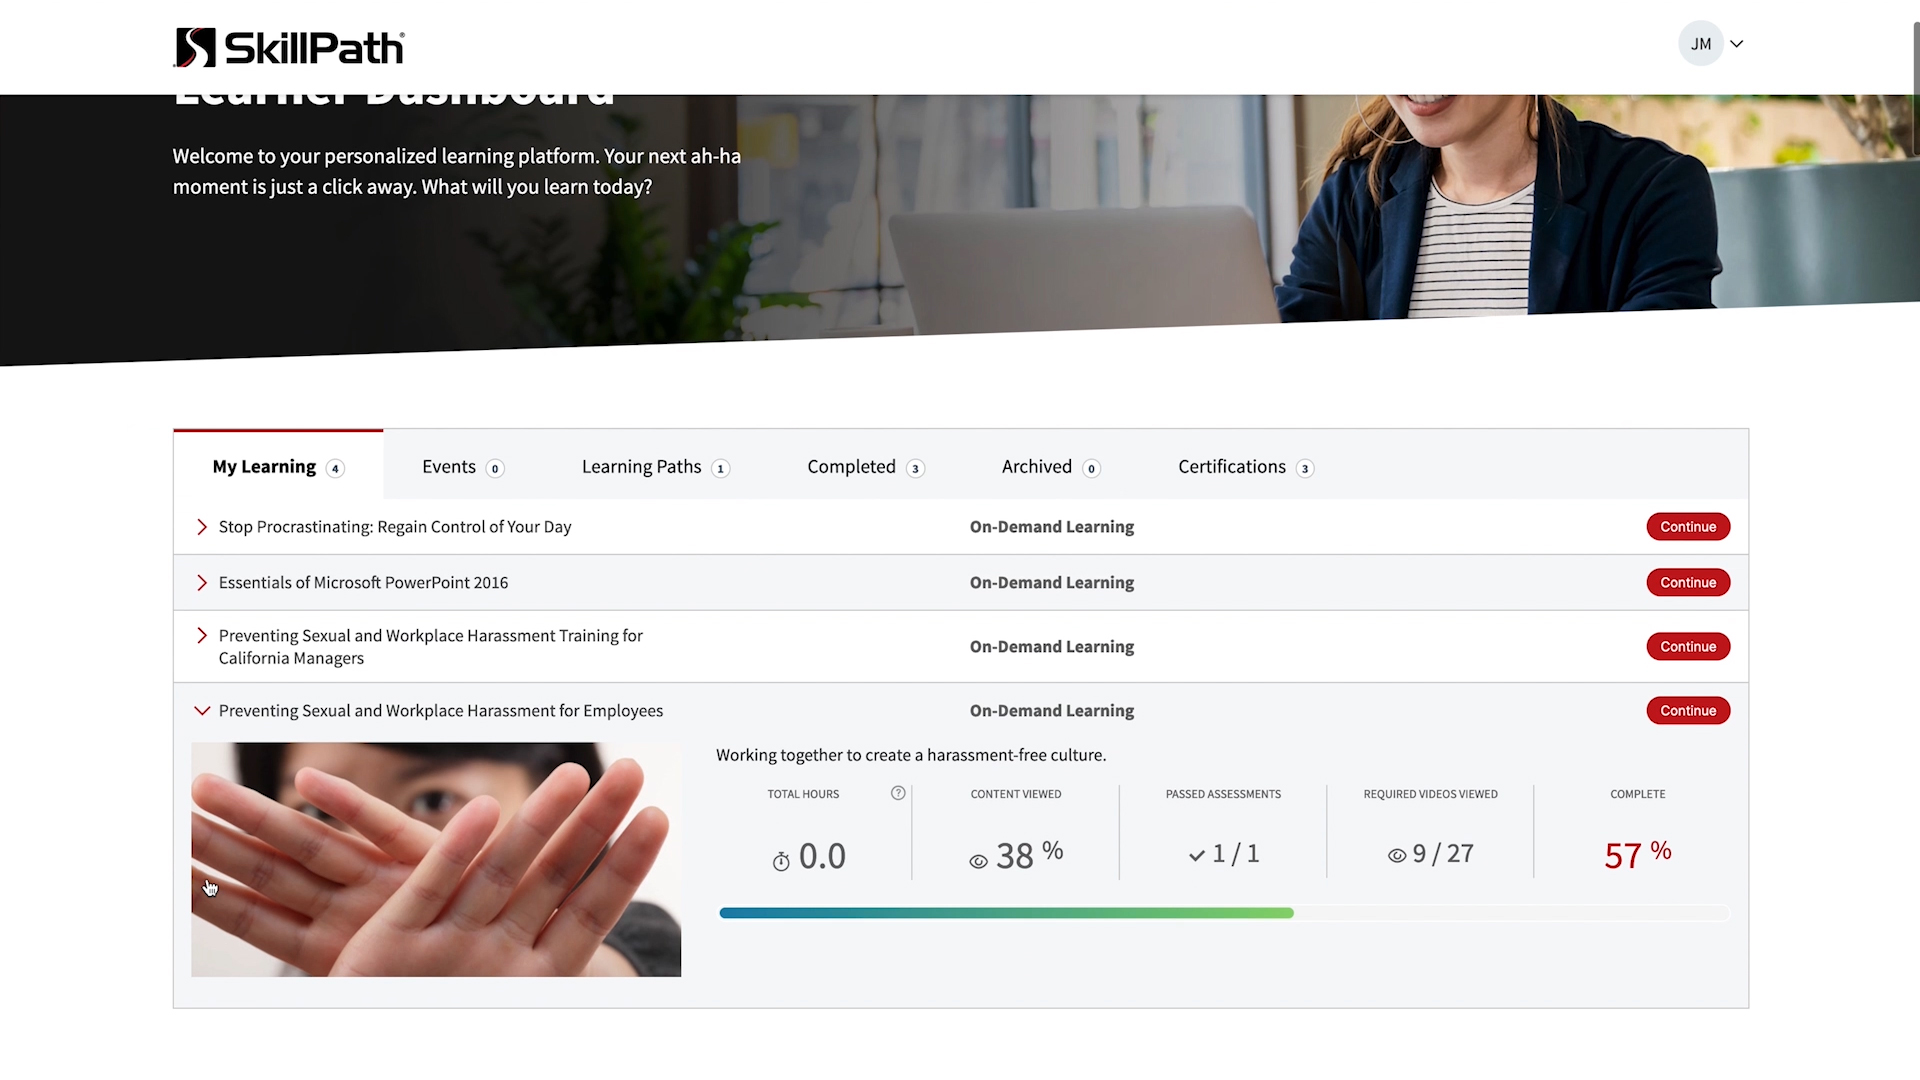 Every employee can log in to their own personalized dashboard and see at a glance the courses they need to complete and the overall progress they have made.